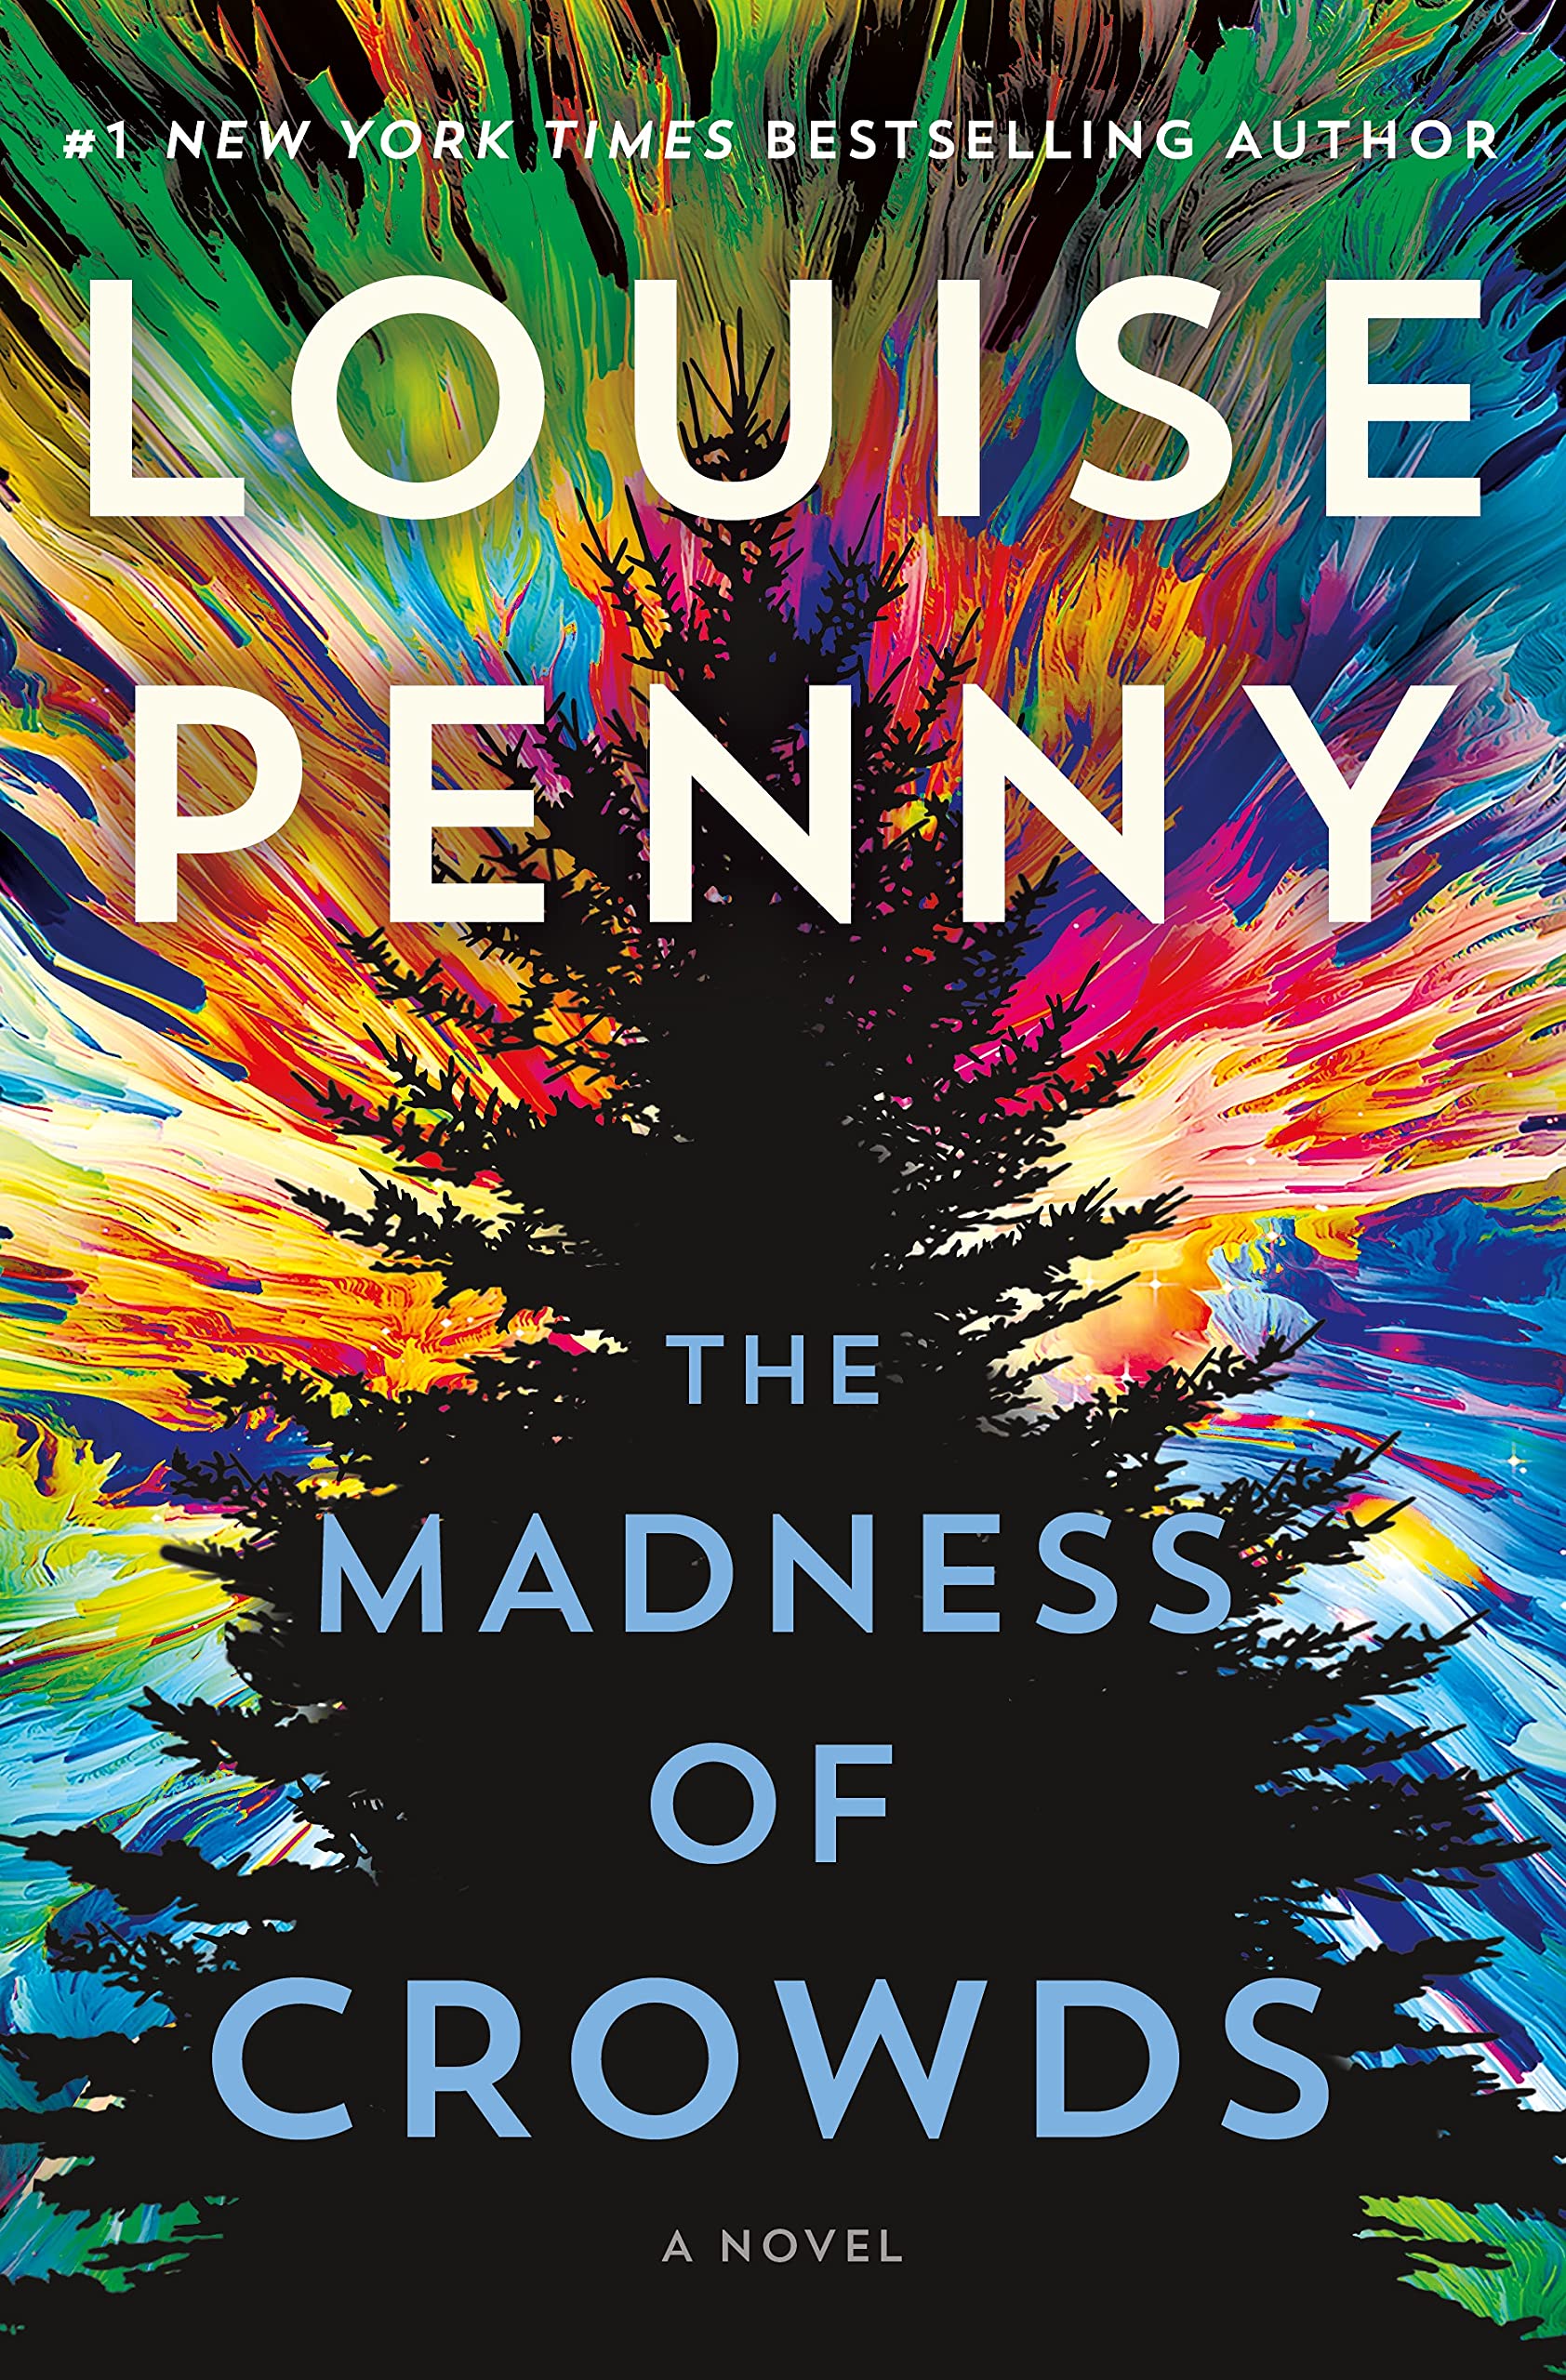 Read-Alikes for ‘The Madness of Crowds’ by Louise Penny | LibraryReads